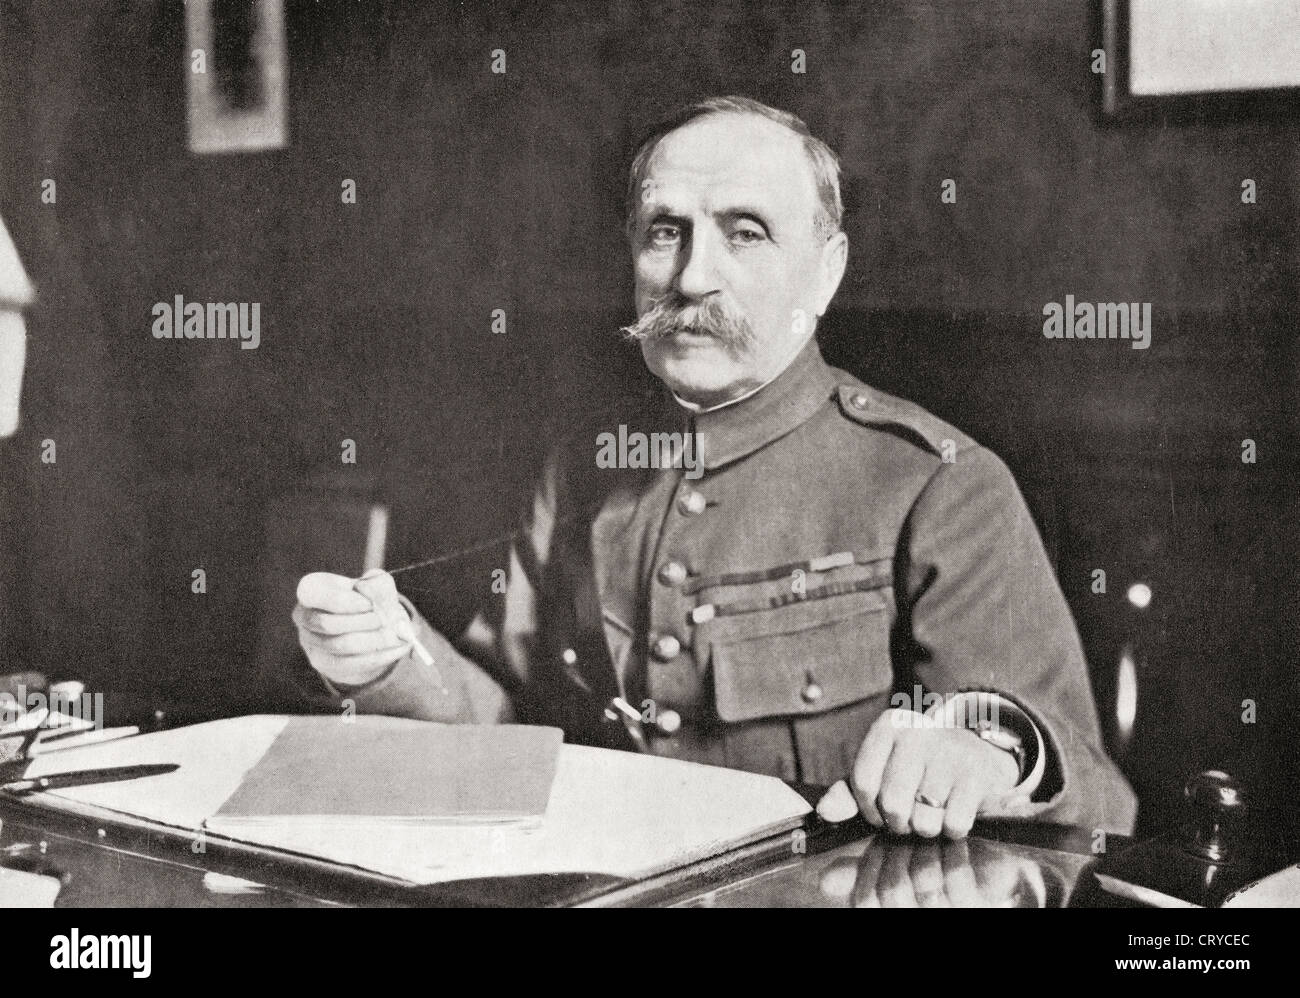 Marshal Ferdinand Foch, 1851 – 1929. French soldier, military theorist and First World War hero. From The Year 1919 Illustrated. Stock Photo